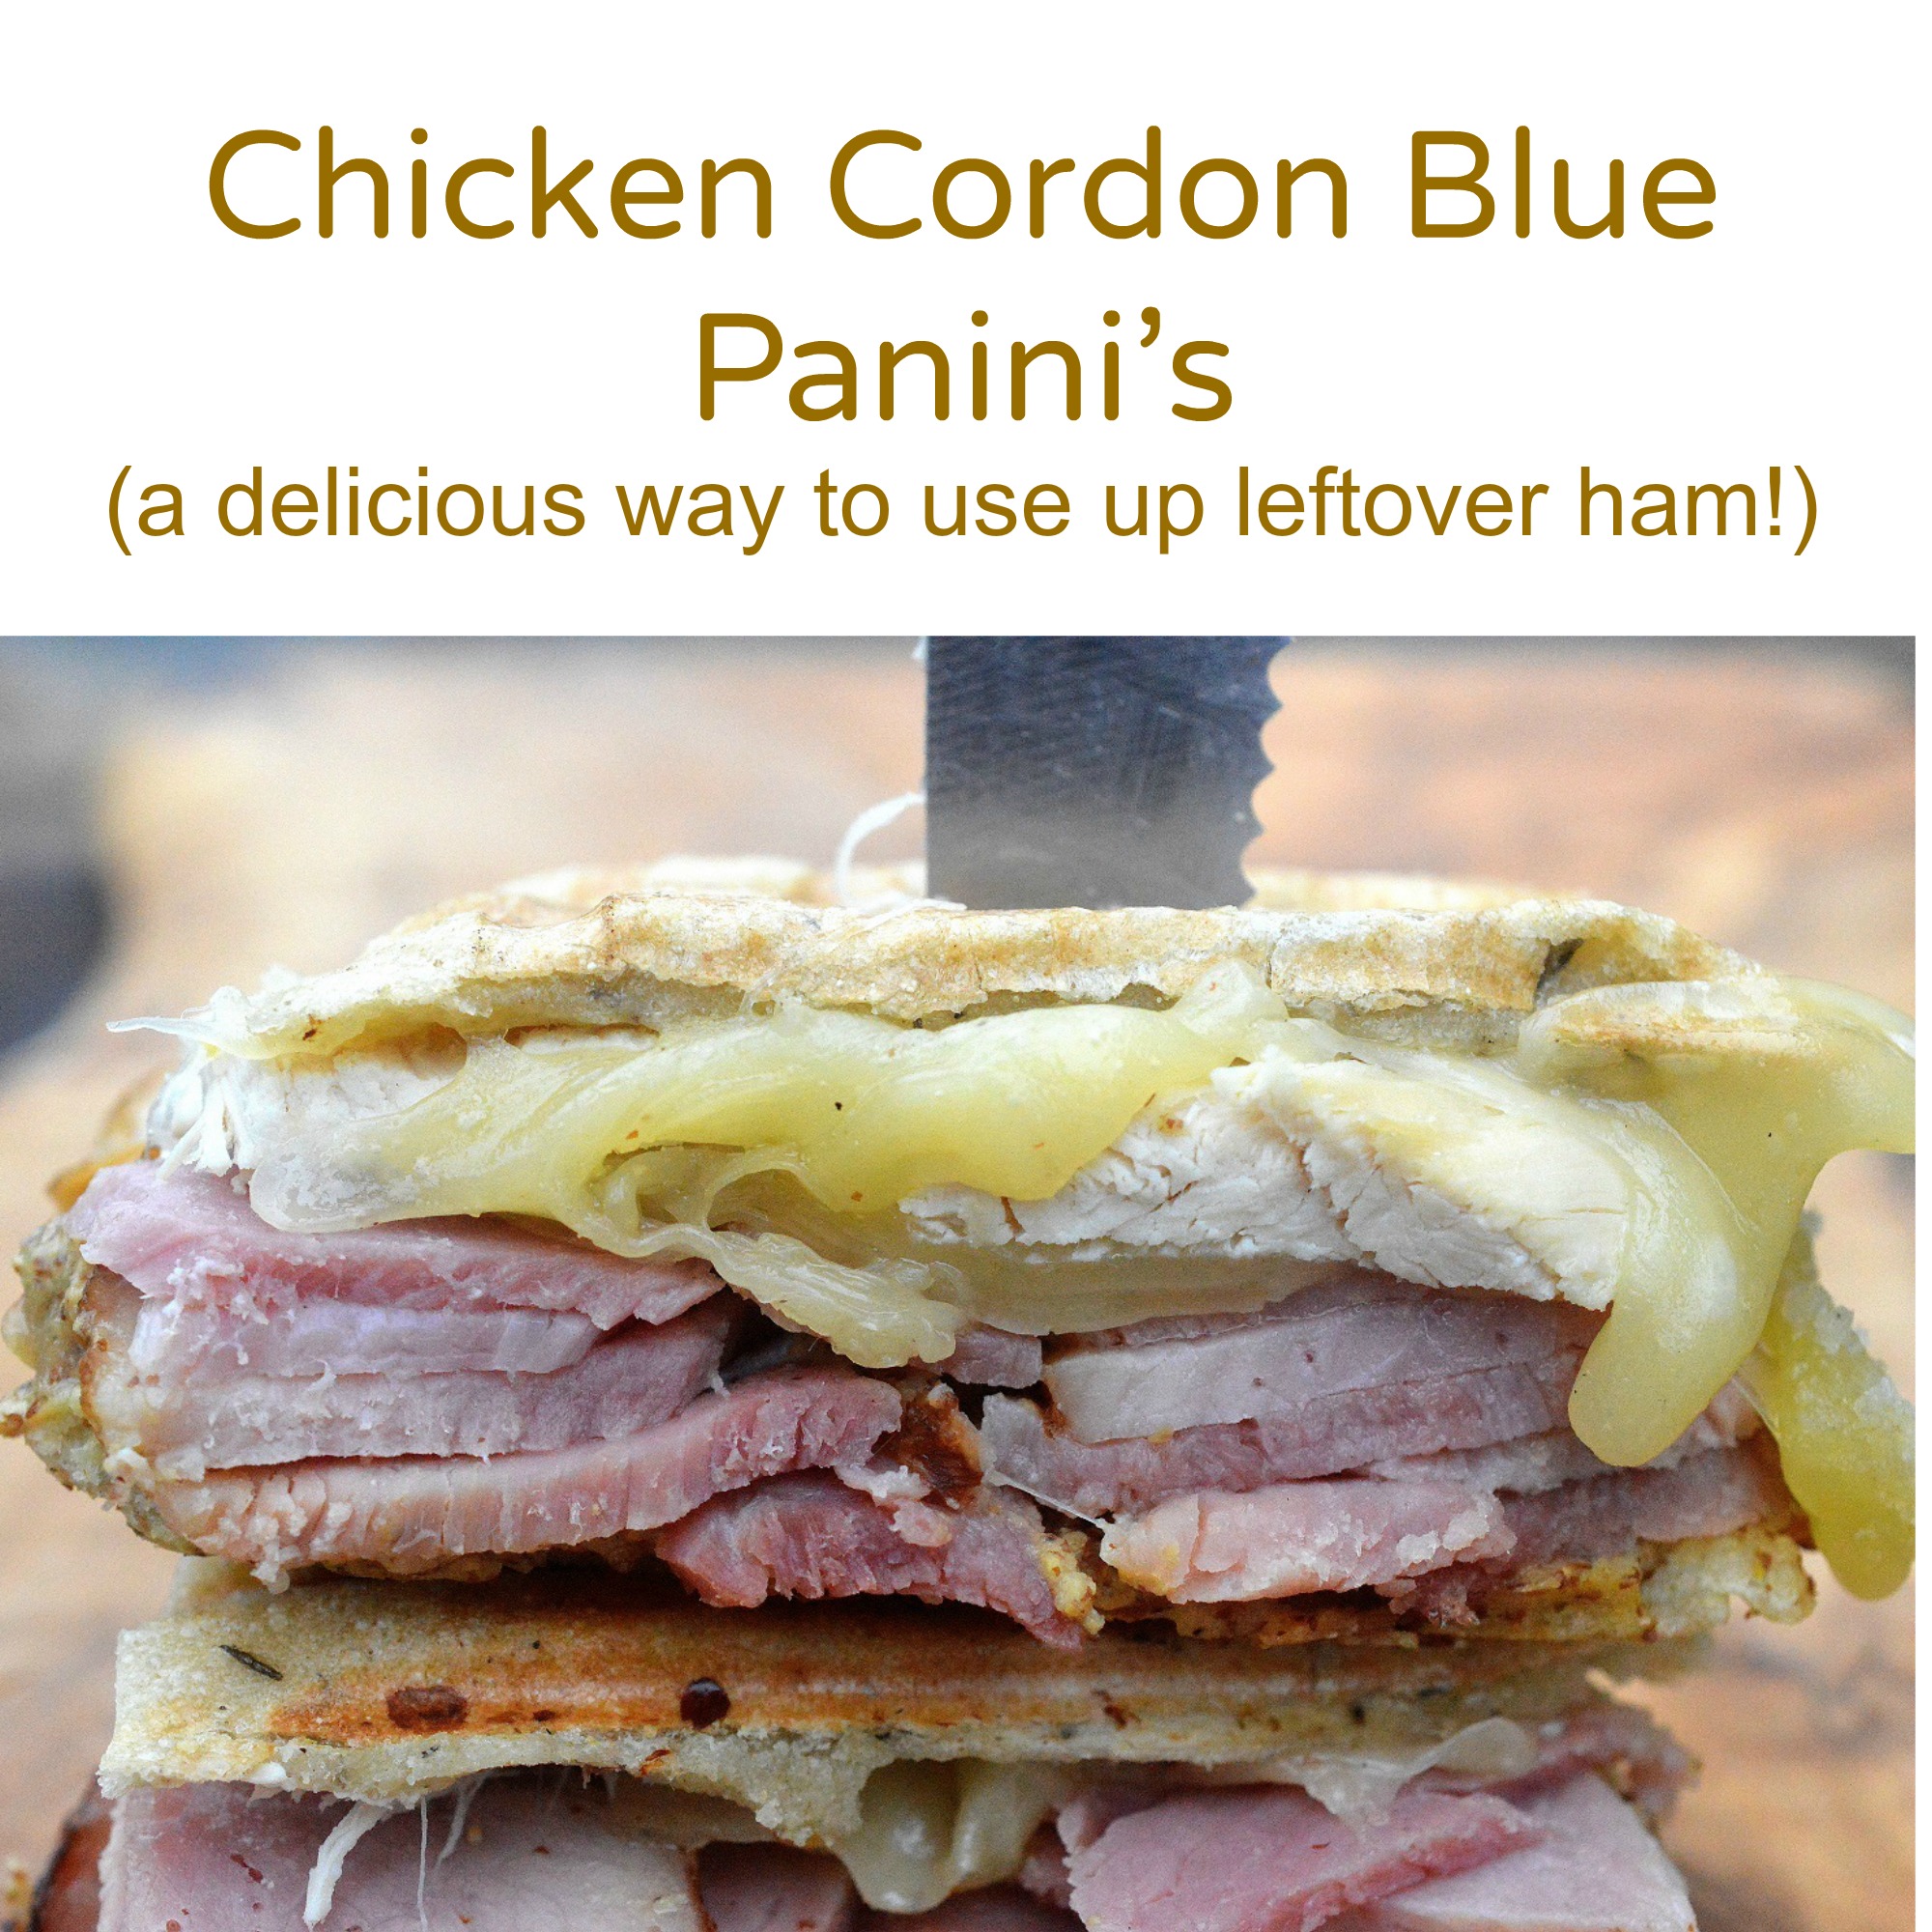 Chicken Cordon Blue Panini's a delicious way to use up leftover ham